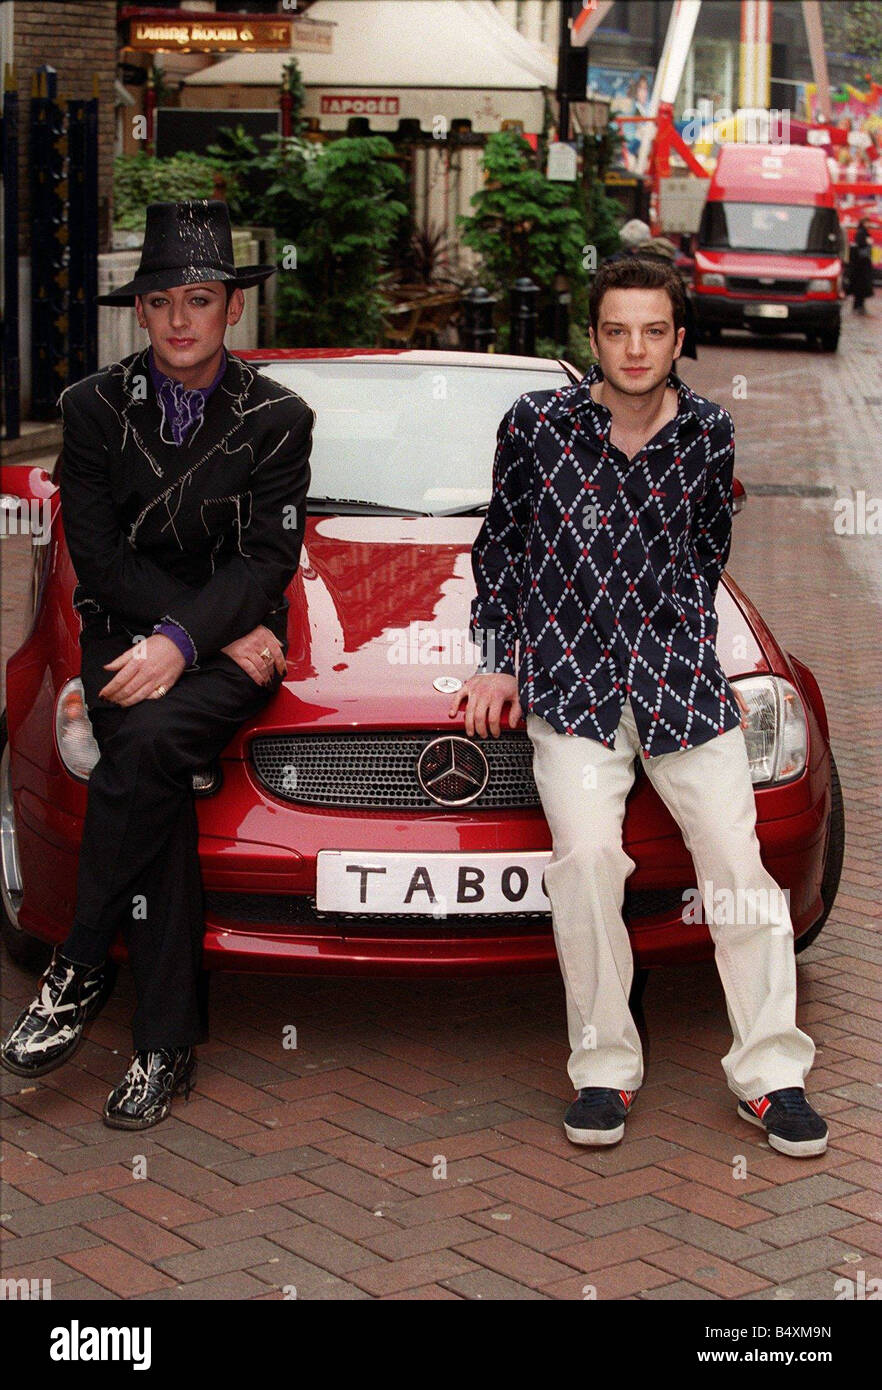 Boy George and Euan Morton December 2001 TABOO number place red Mercedes car Culture Club star new musical called Taboo Stock Photo